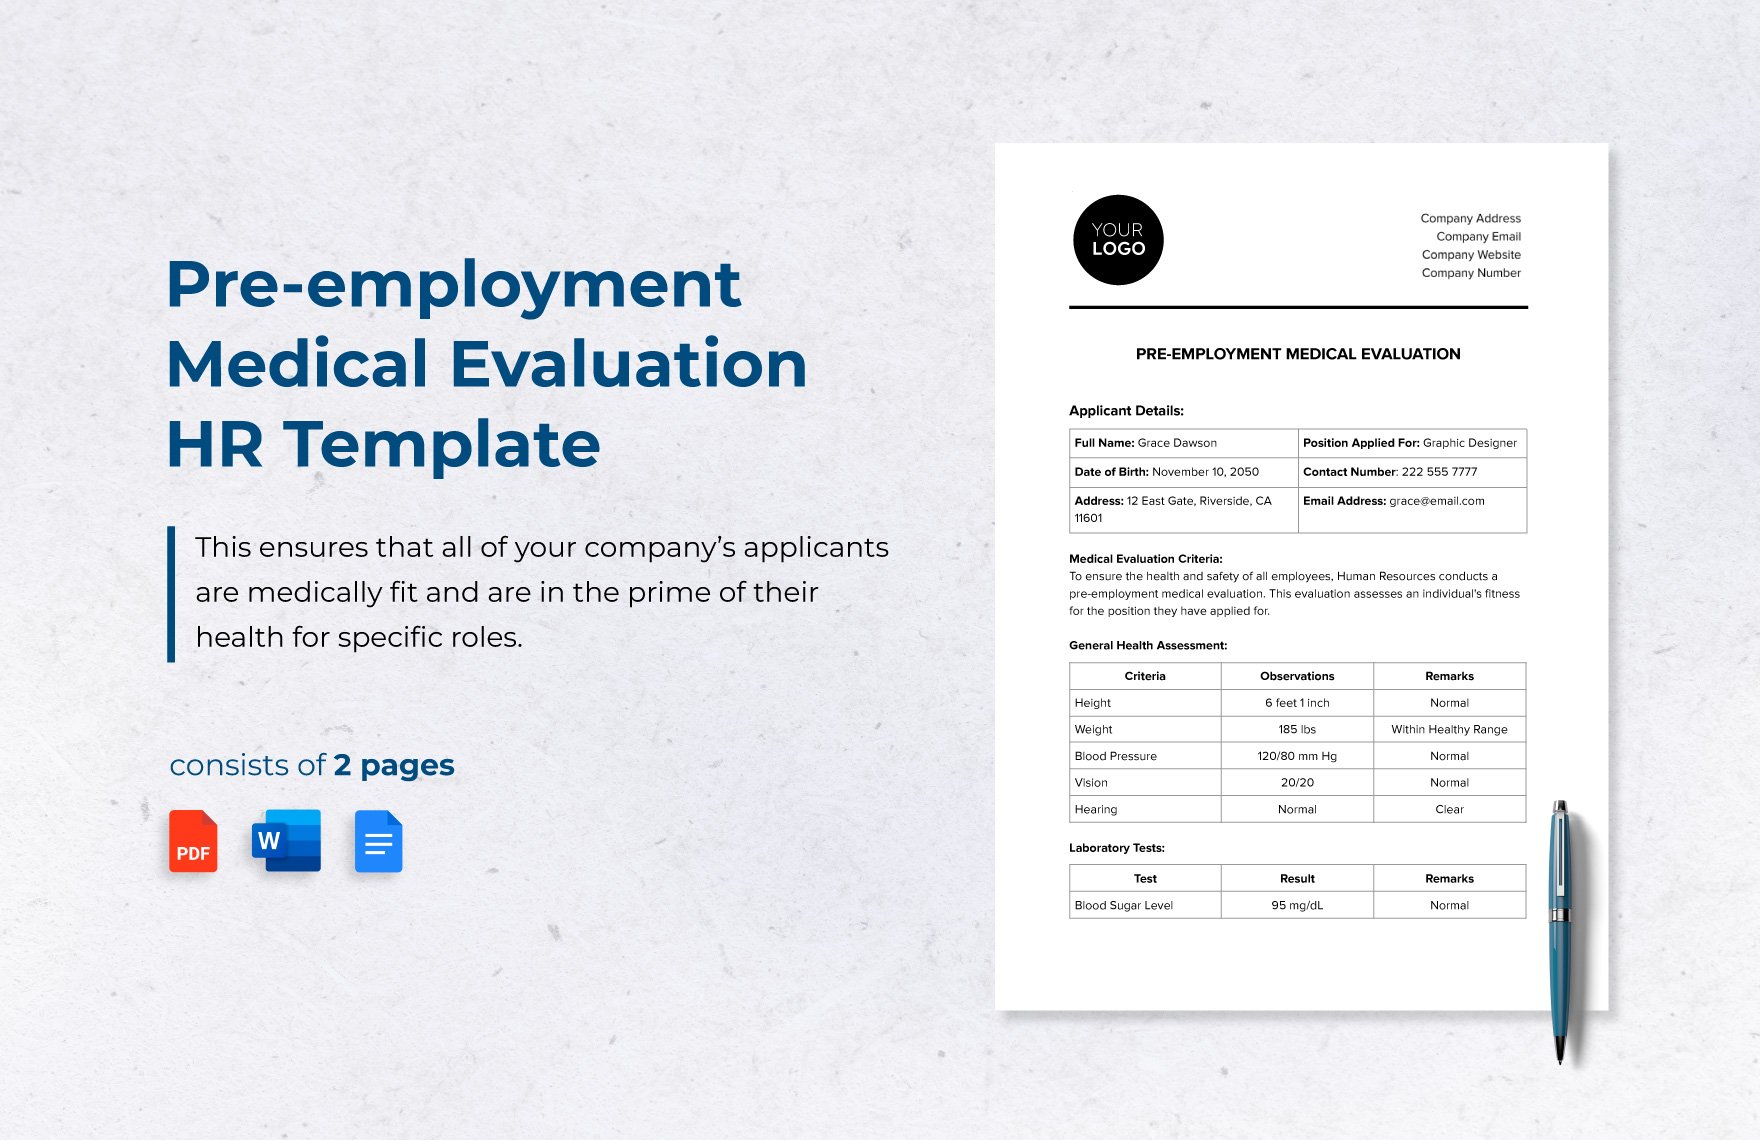 Pre-employment Medical Evaluation HR Template